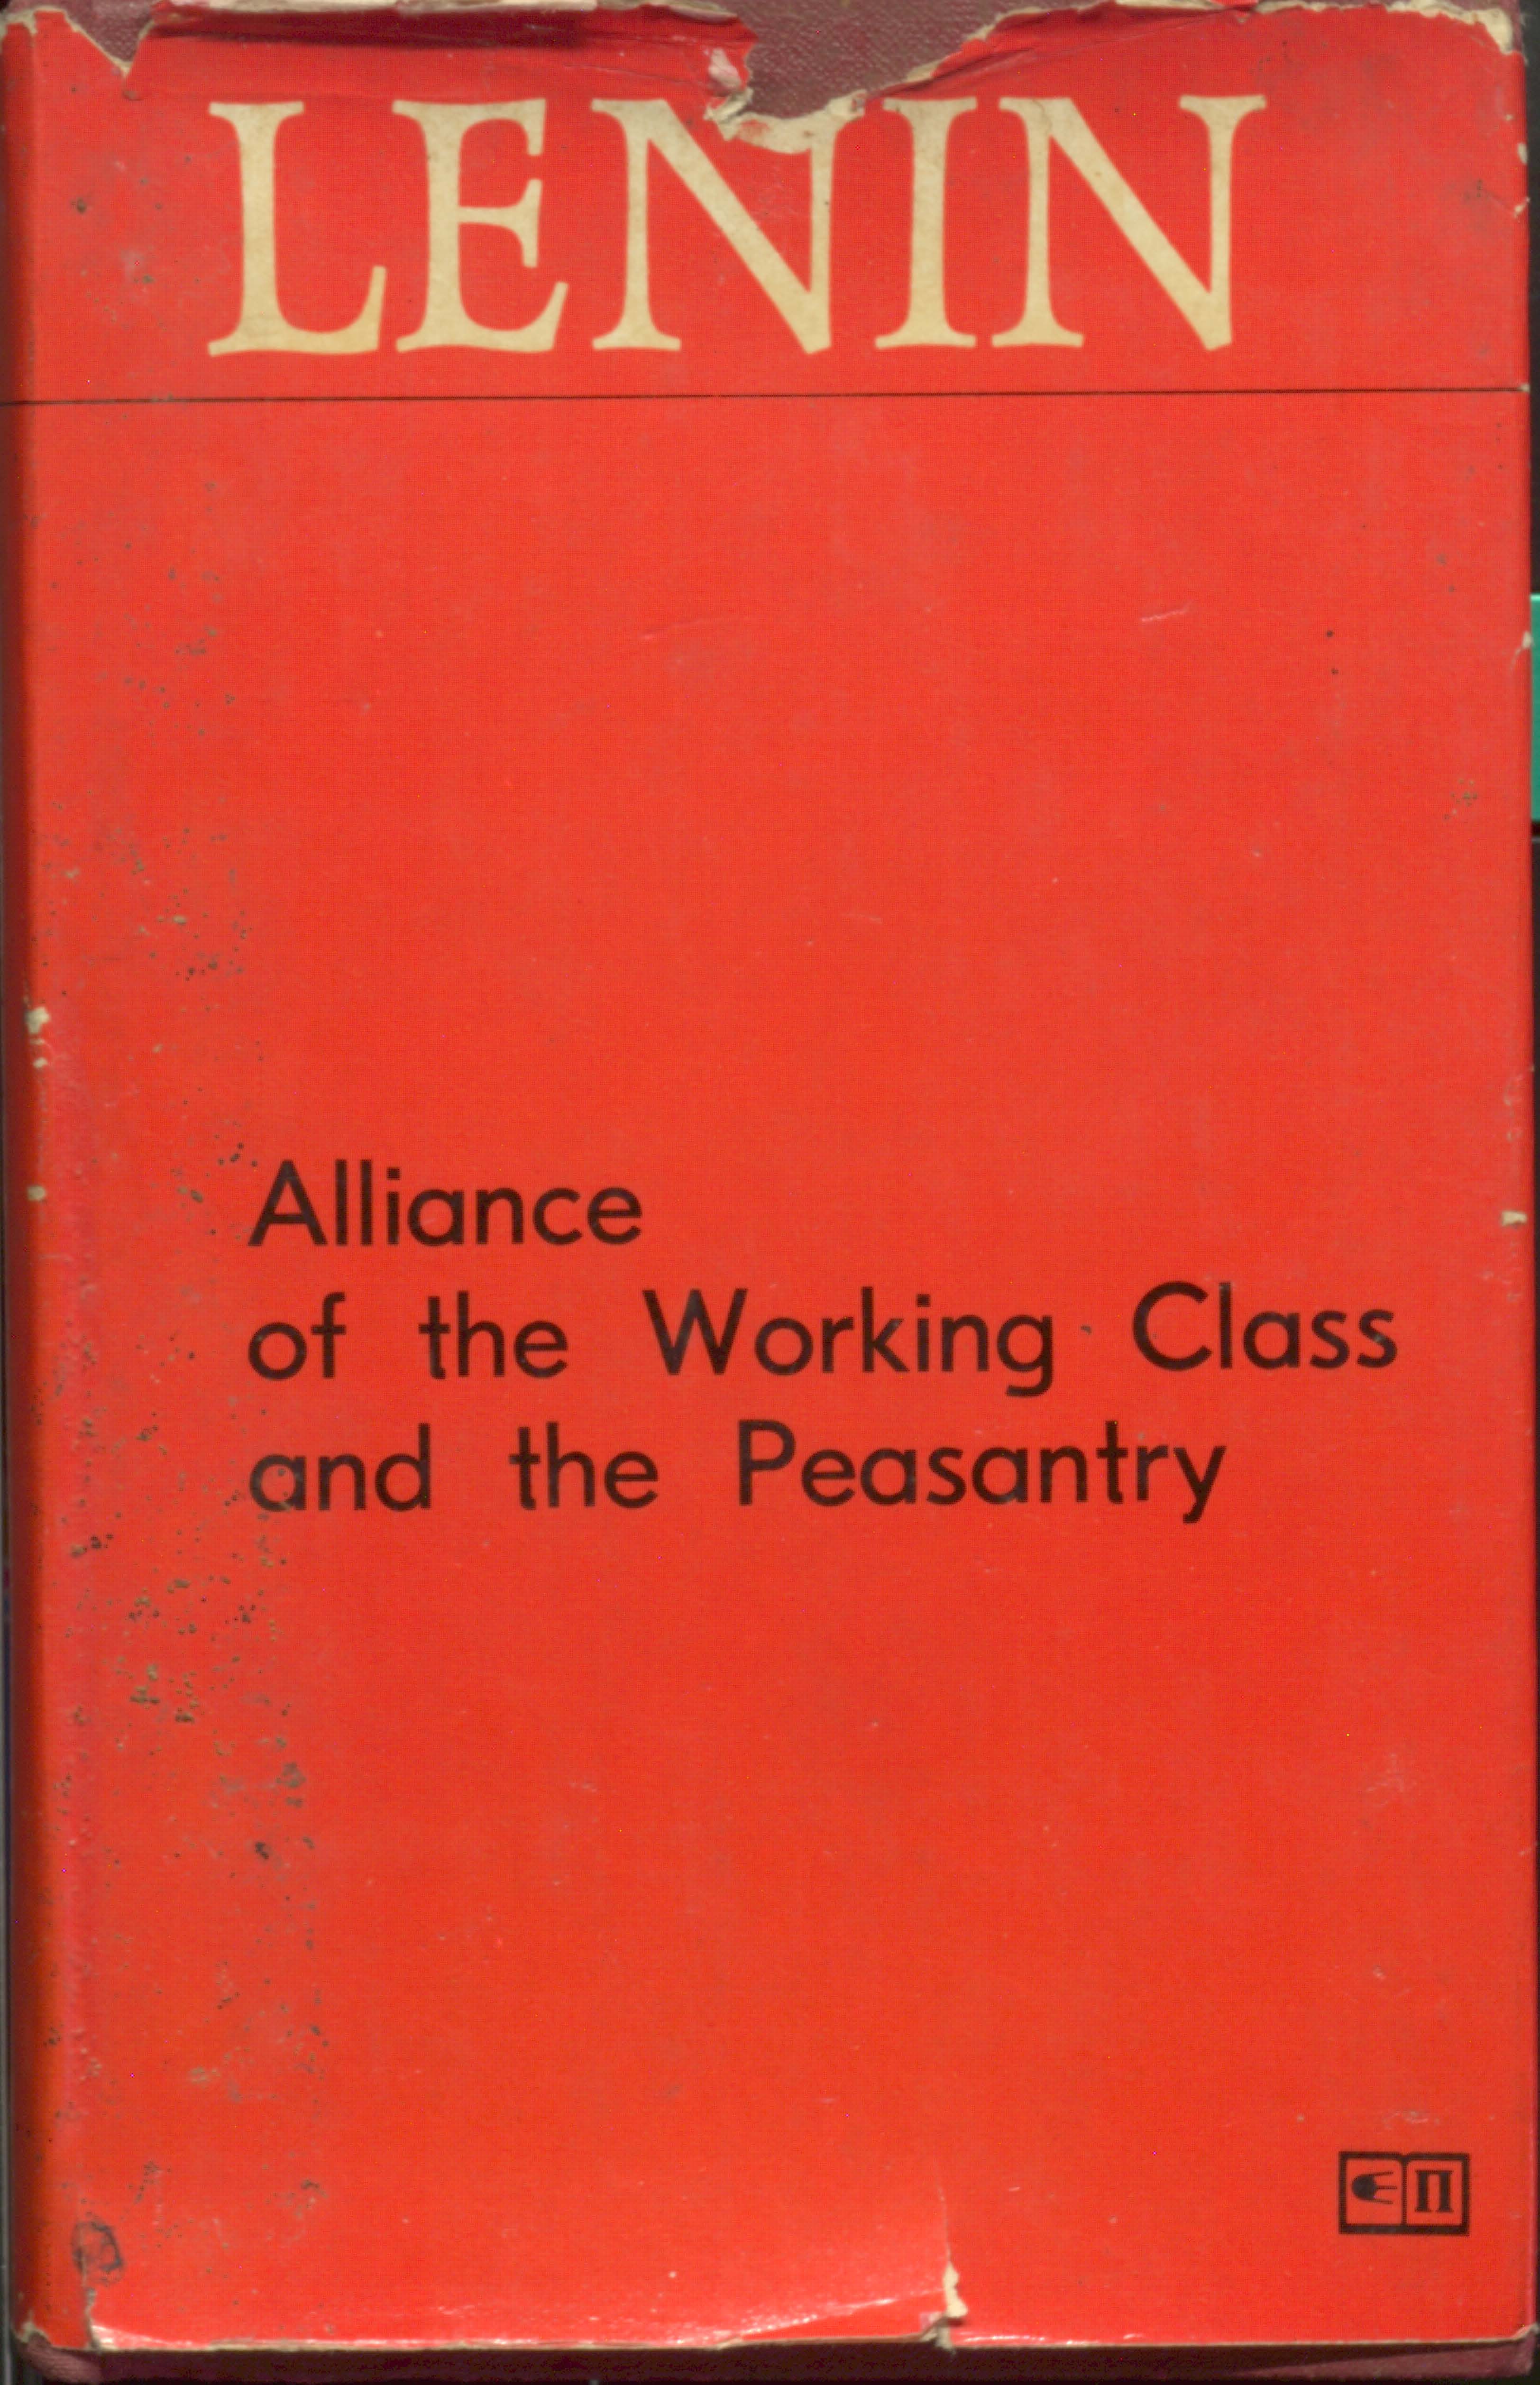 Lenin alliance of the working class and the peasantry